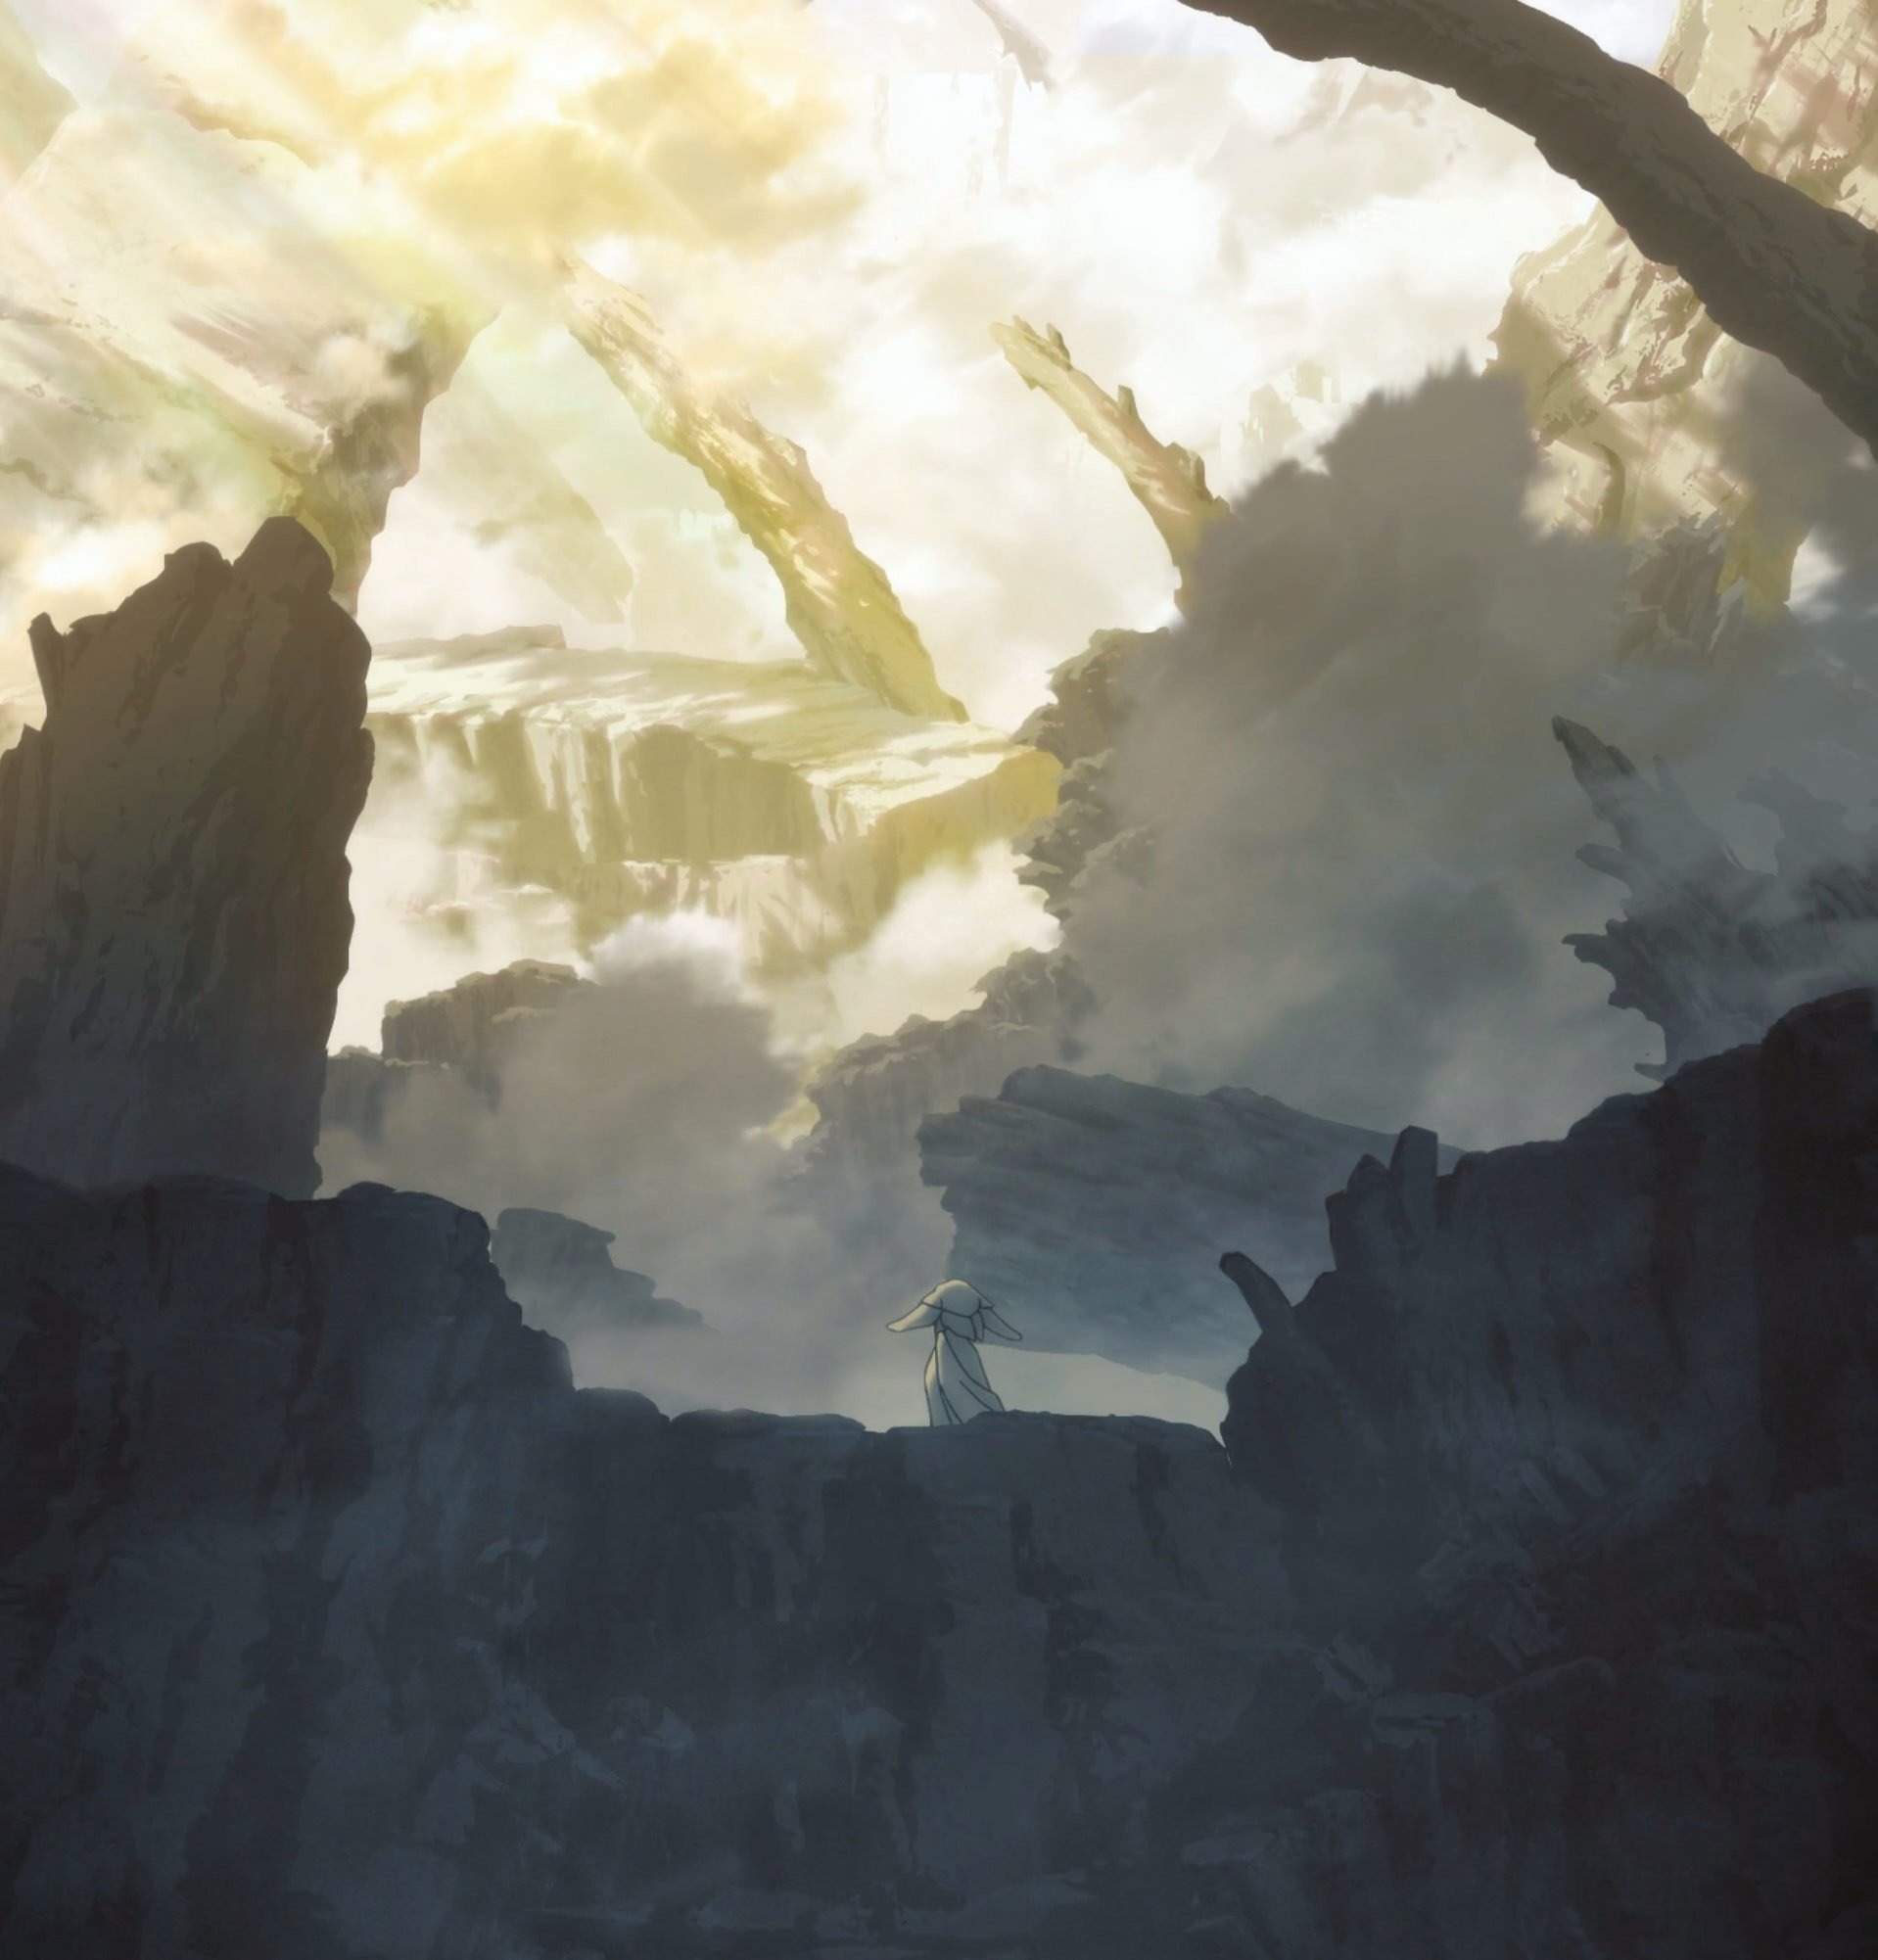 Made in Abyss: Retsujitsu no Ougonkyou Episode 7 Discussion - Forums 